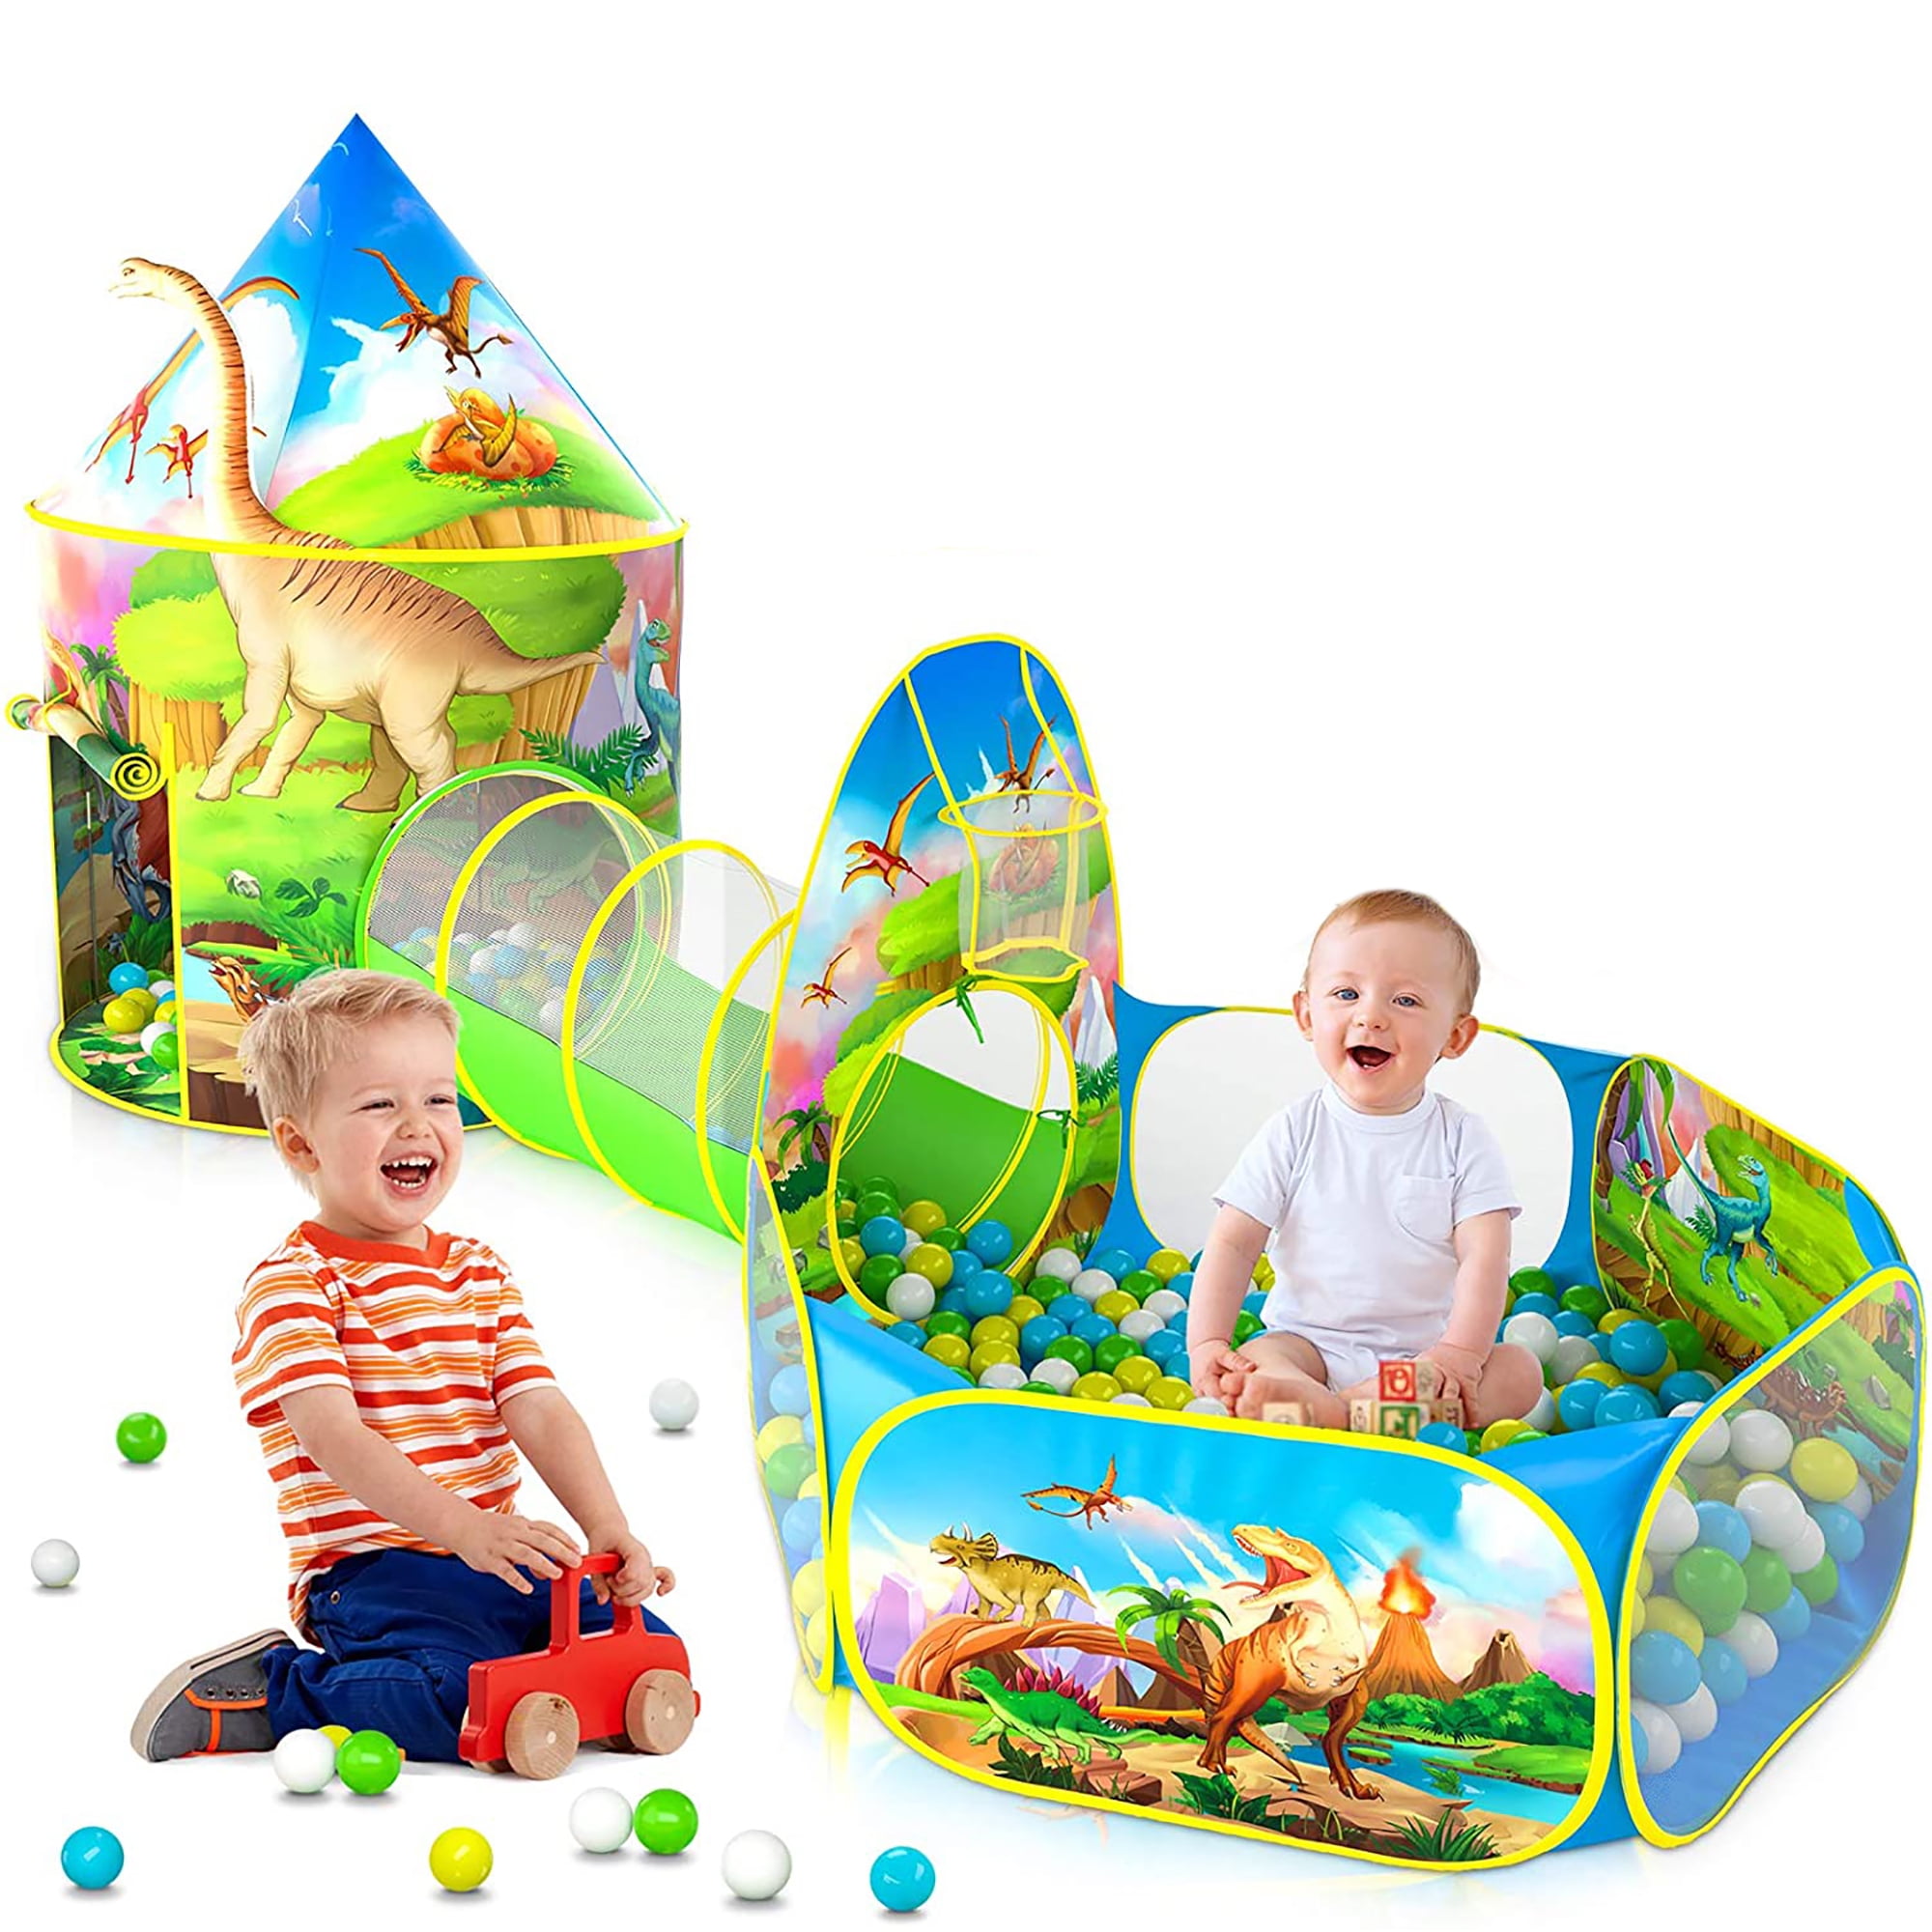 Large Dinosaurs Toys Ideal for Babies & Children 3-10 Years Old 3pc Pop Up Kids Indoor Tent Playhouse for Boys Girls Kids Play Tent with Tunnel & Ball Pit Castle House for Toddlers 